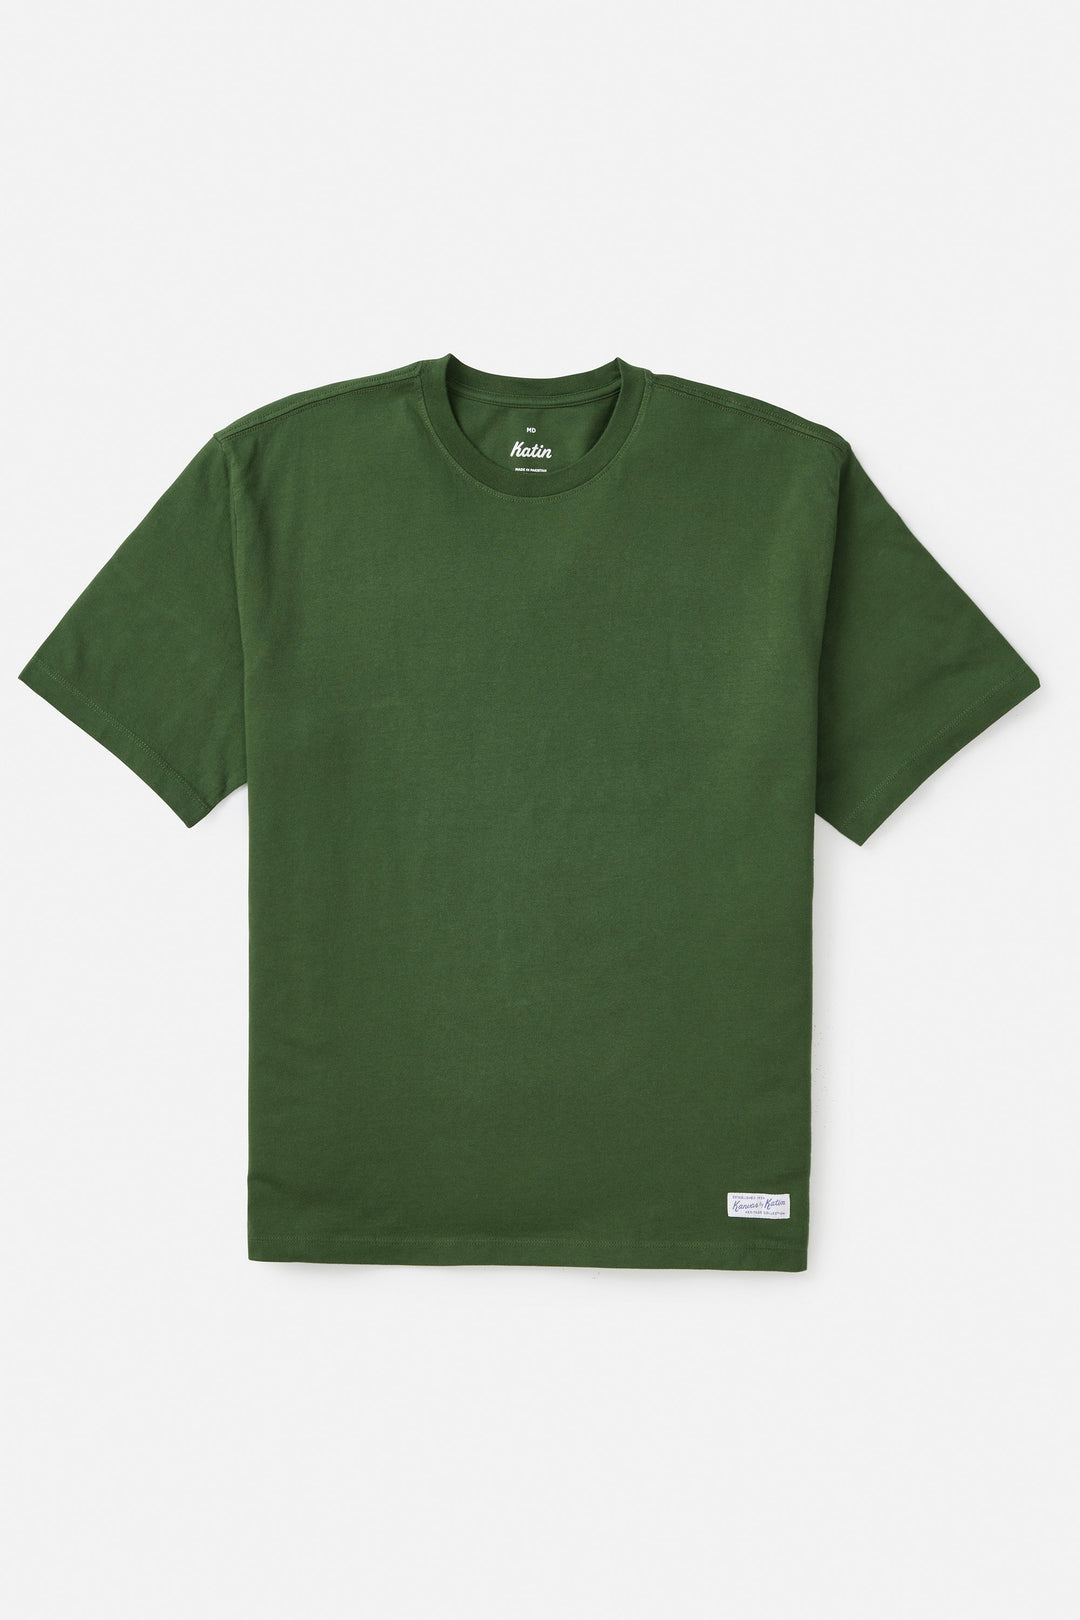 Katin Box Fit Heritage Tee - FOREST - Sun Diego Boardshop